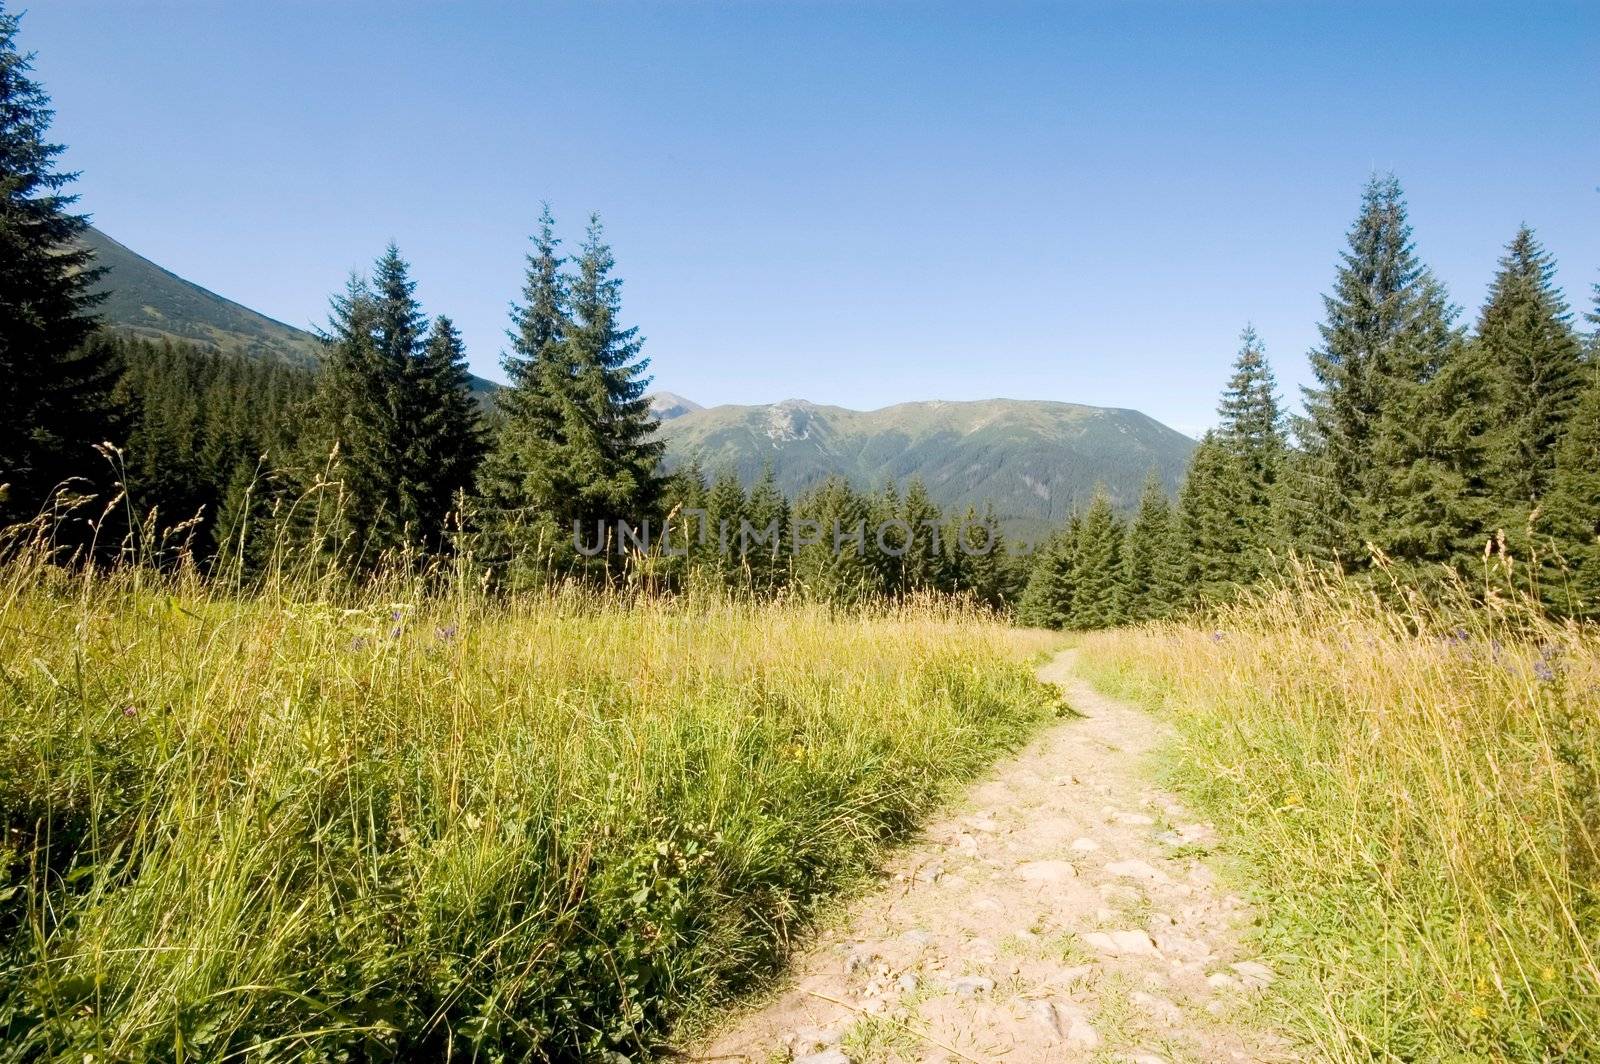 Pathway in Polish Tatra mountains in Summer